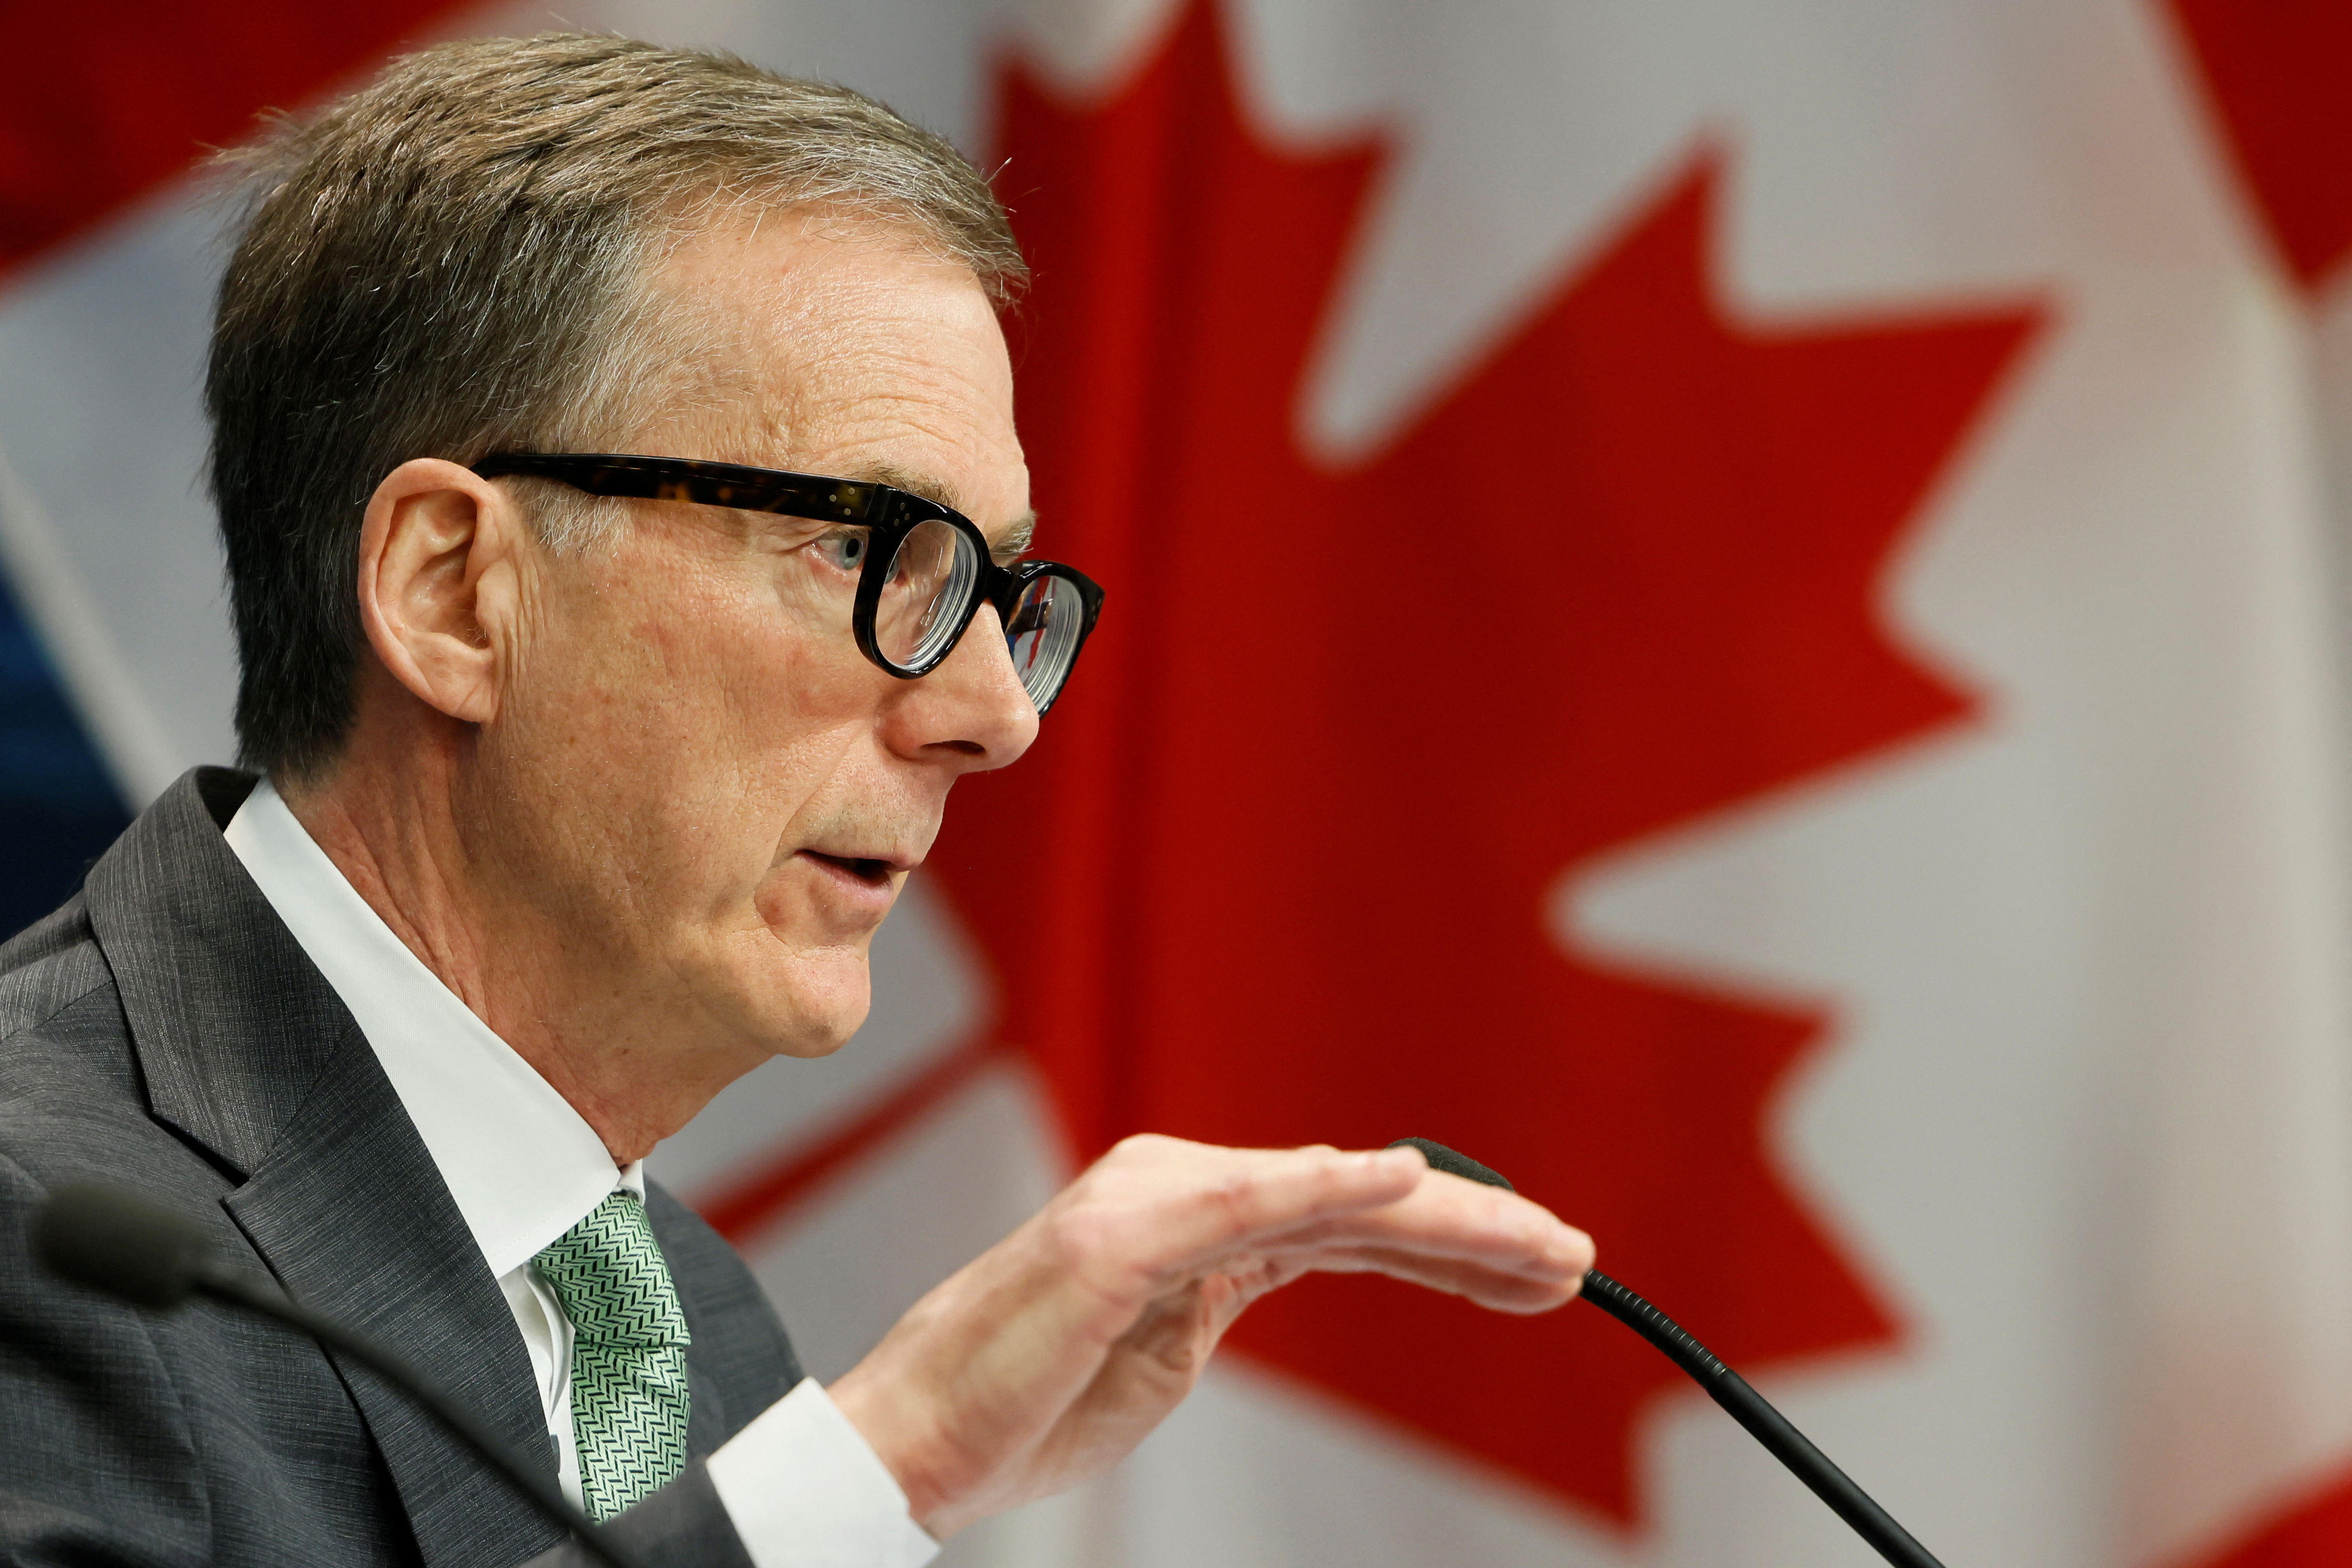 Bank of Canada Governor Tiff Macklem takes part in a news conference after announcing an interest rate decision in Ottawa